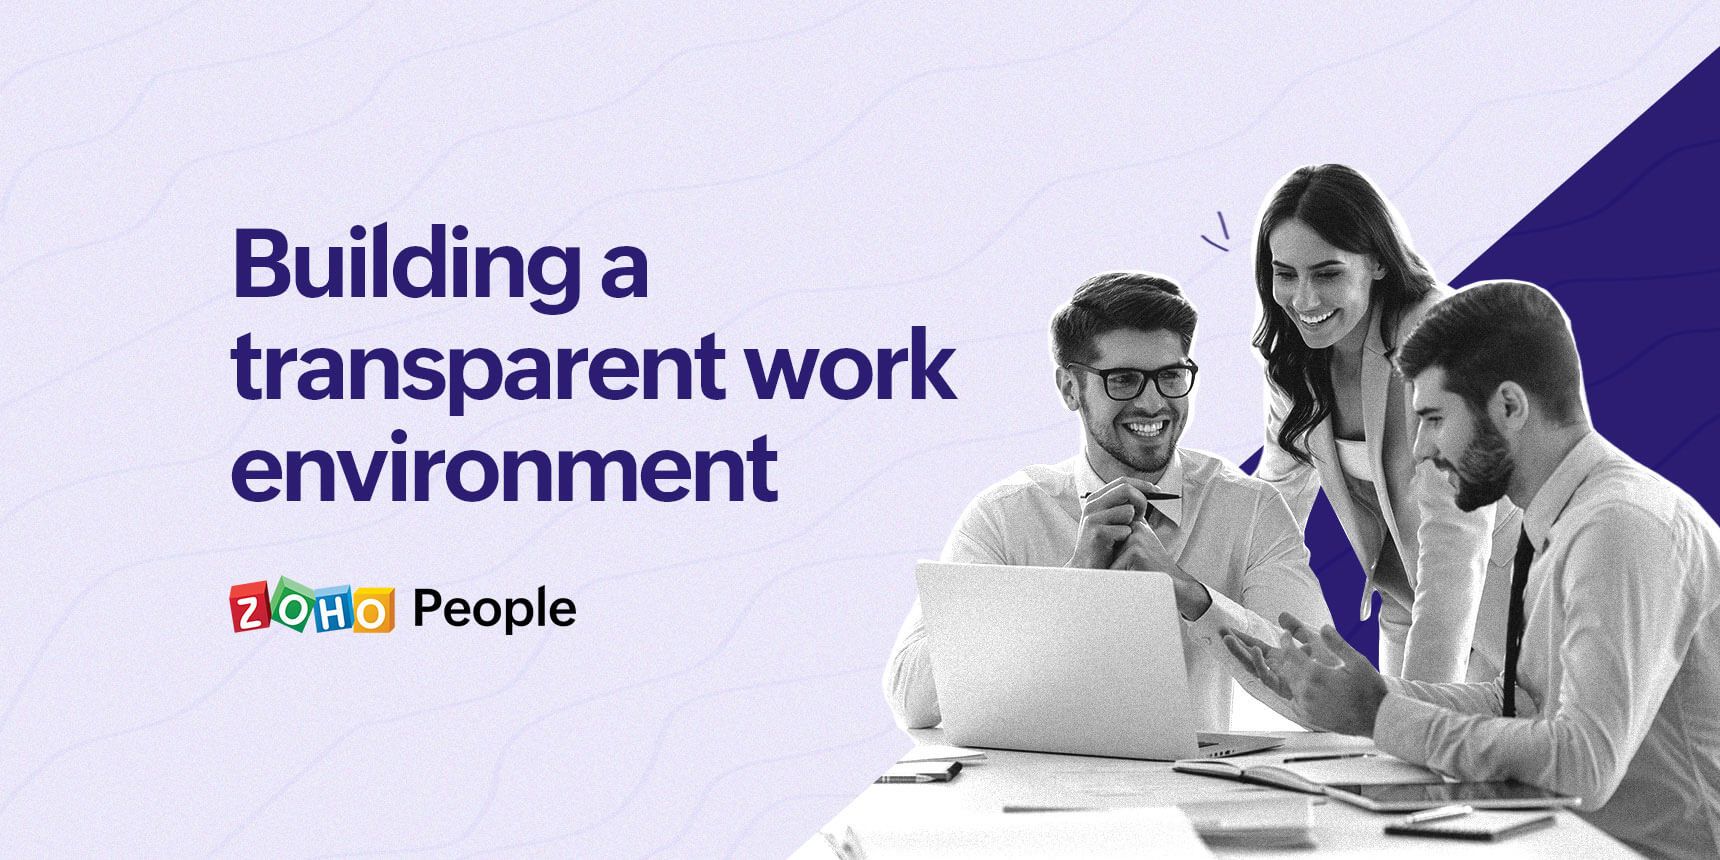 Fostering a transparent work environment 